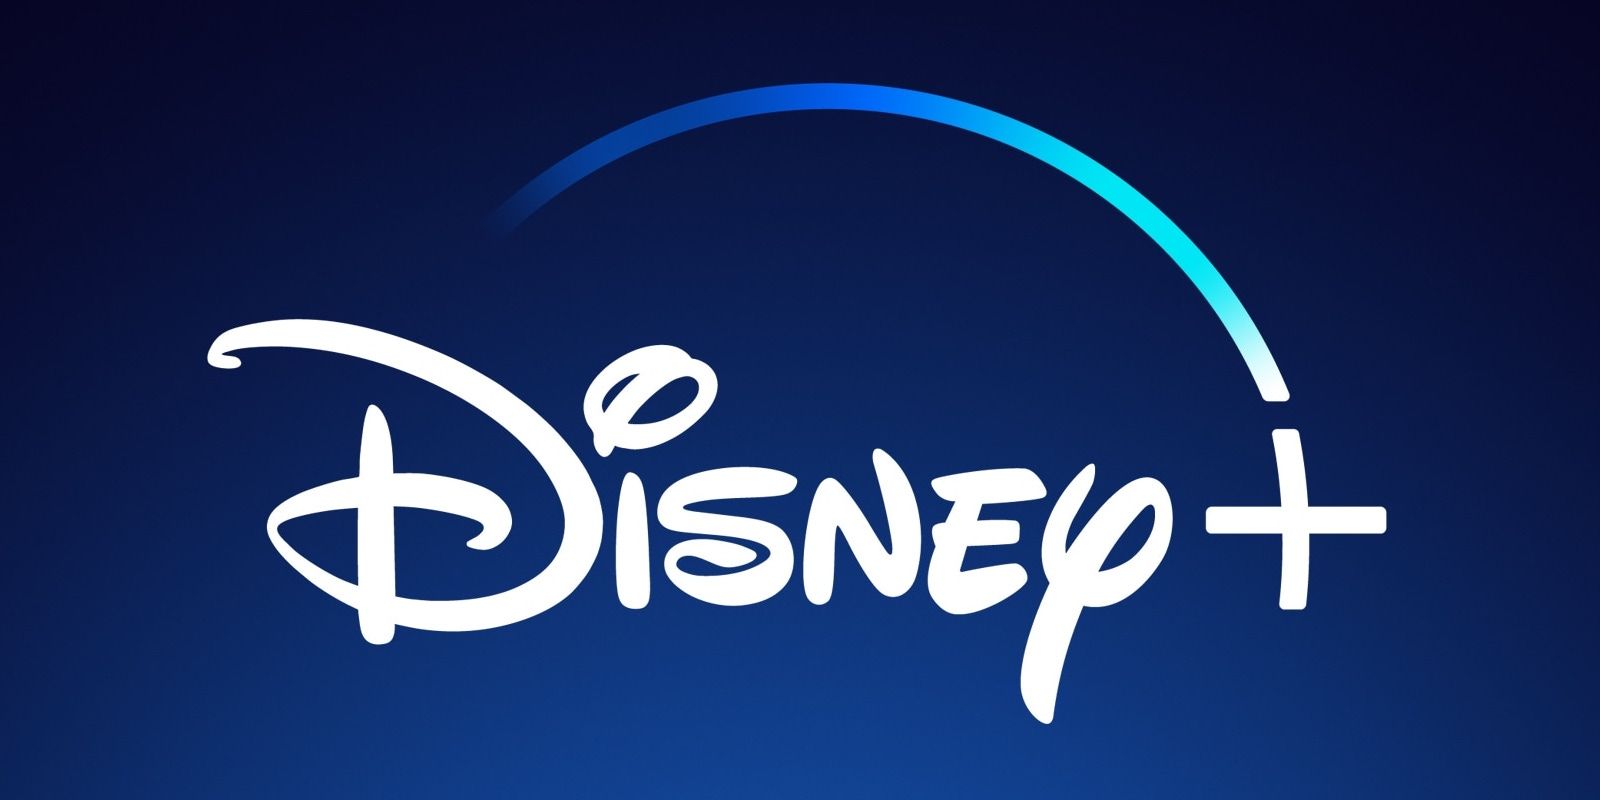 Disney+: Every New Movie & TV Show Coming In April 2022